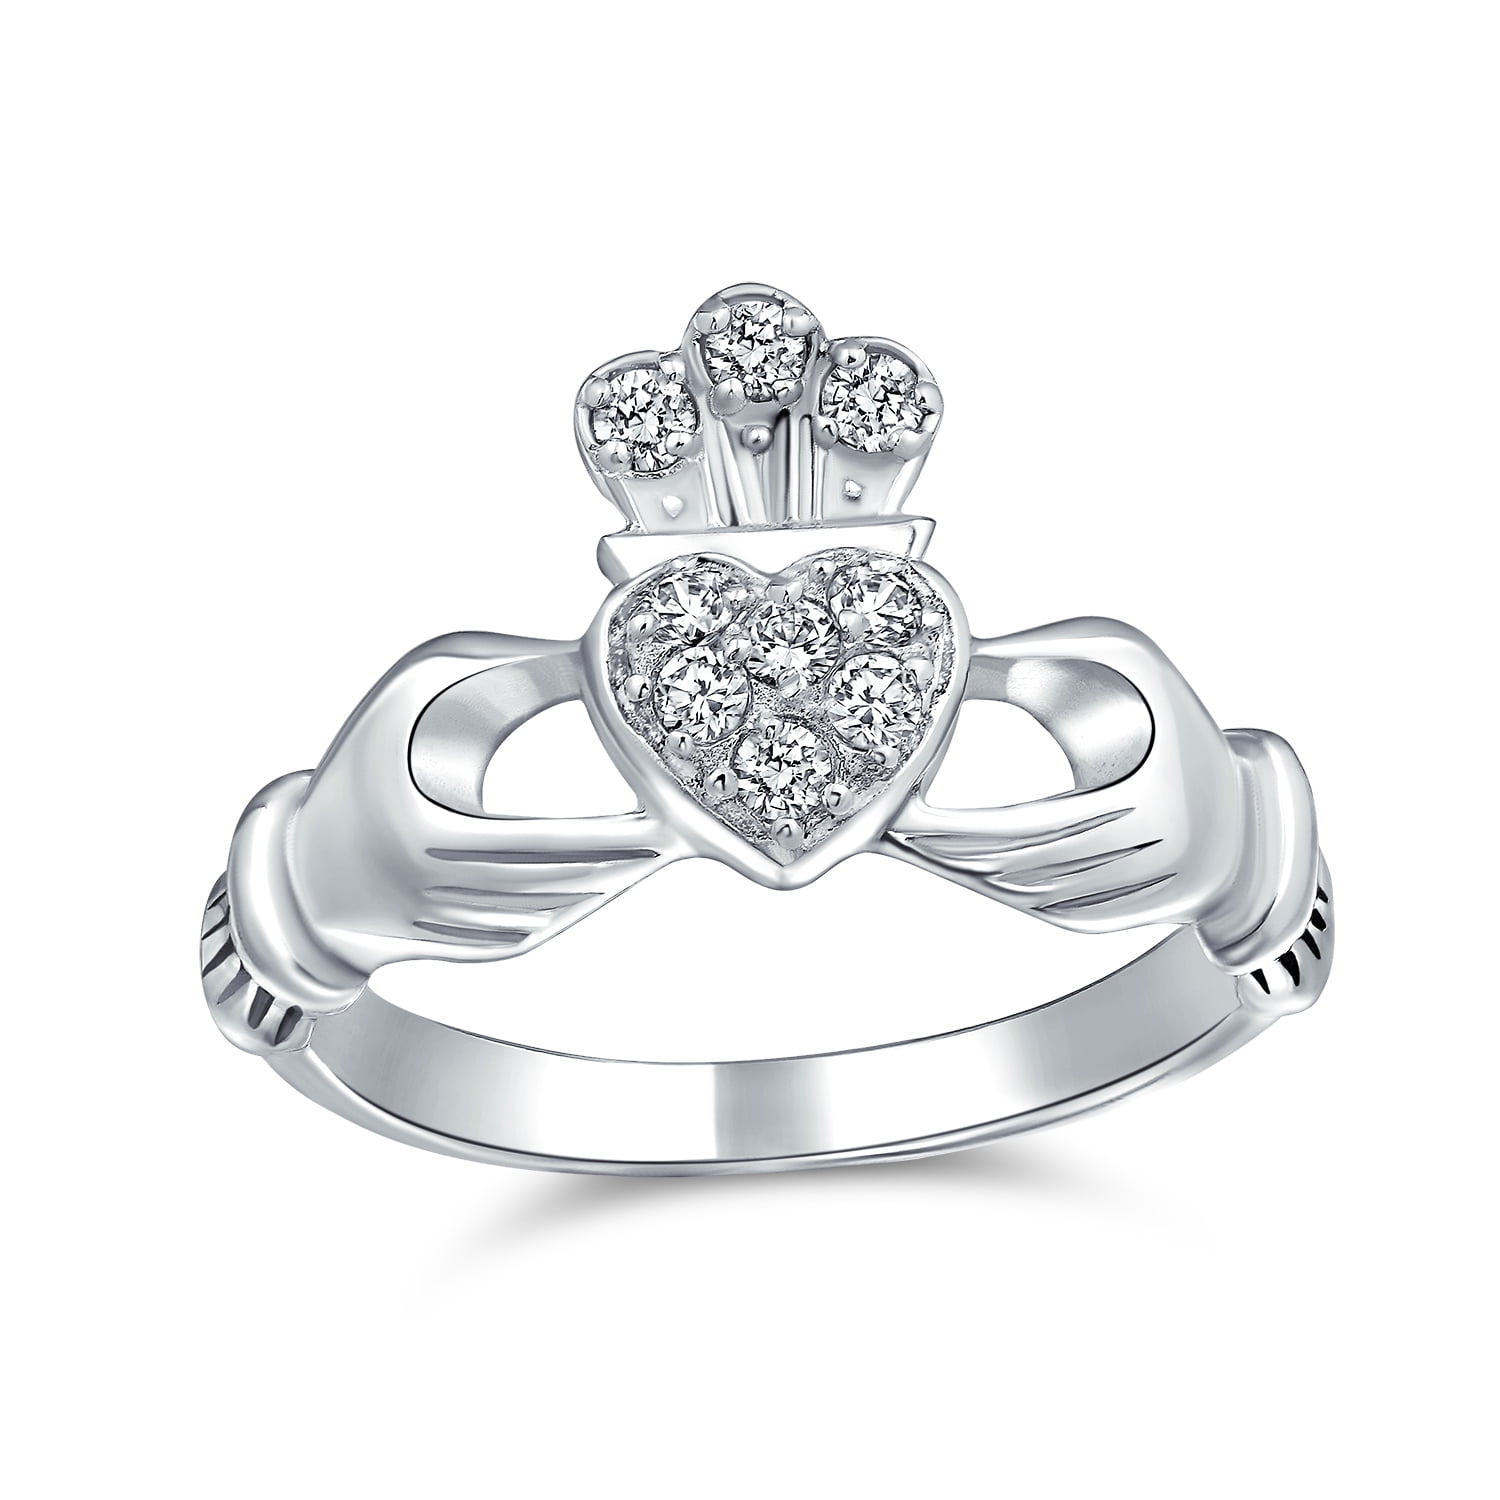 .925 Sterling Silver Irish Heart CZ Claddagh Promise Ring Size 4 5 6 7 8 9 10 